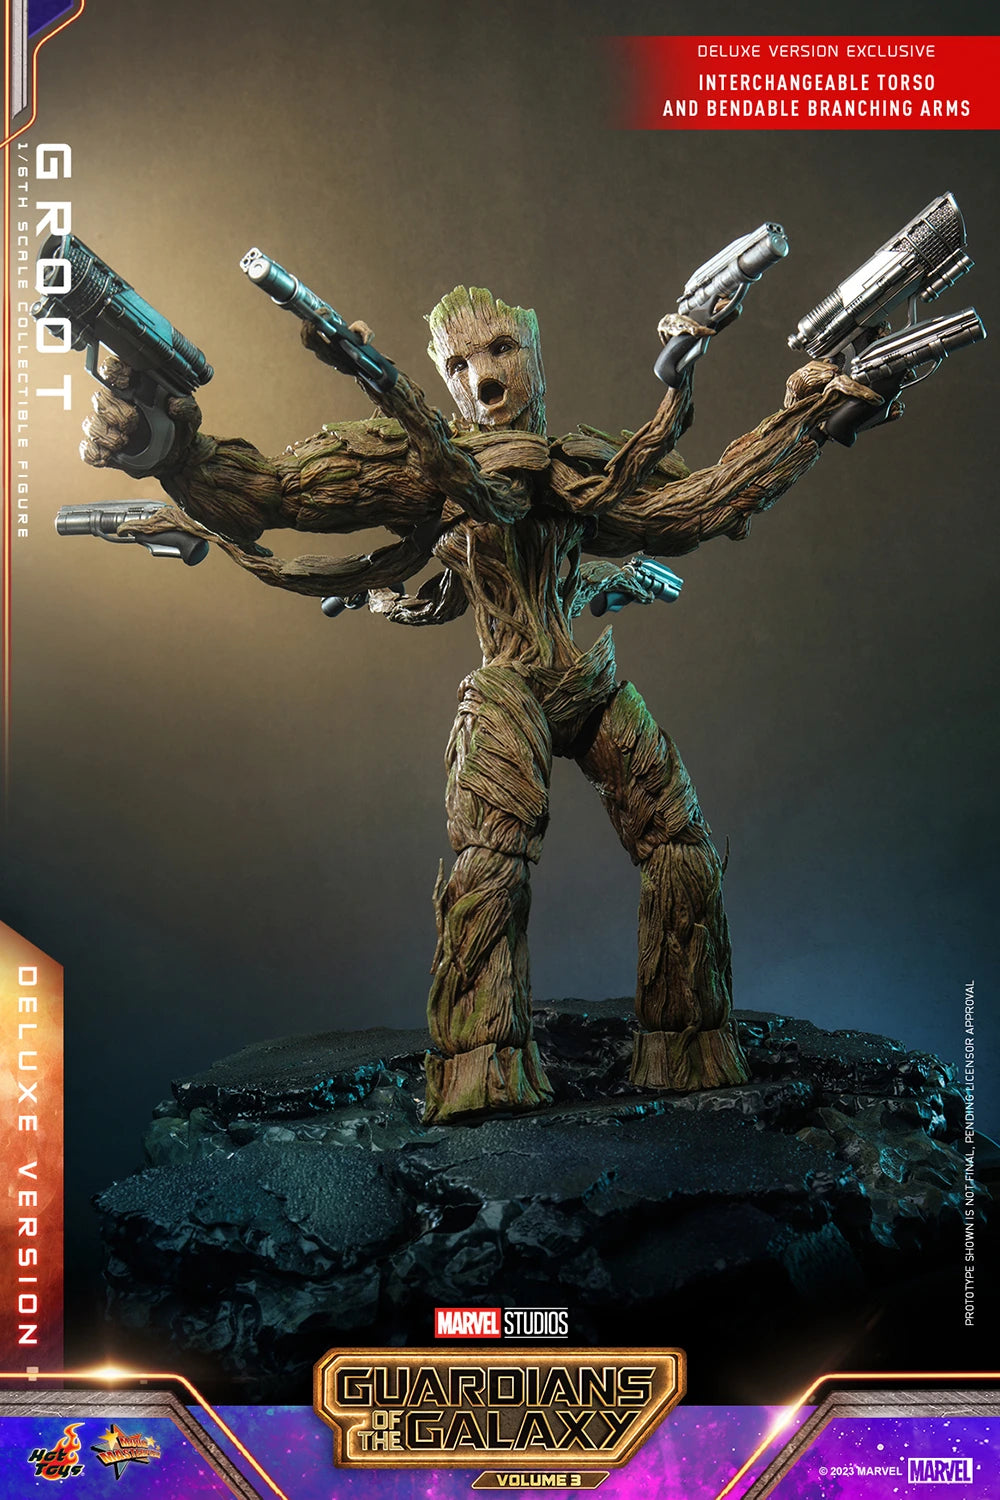 Hot Toys Marvel Guardians of the Galaxy Vol.3 Groot (Deluxe